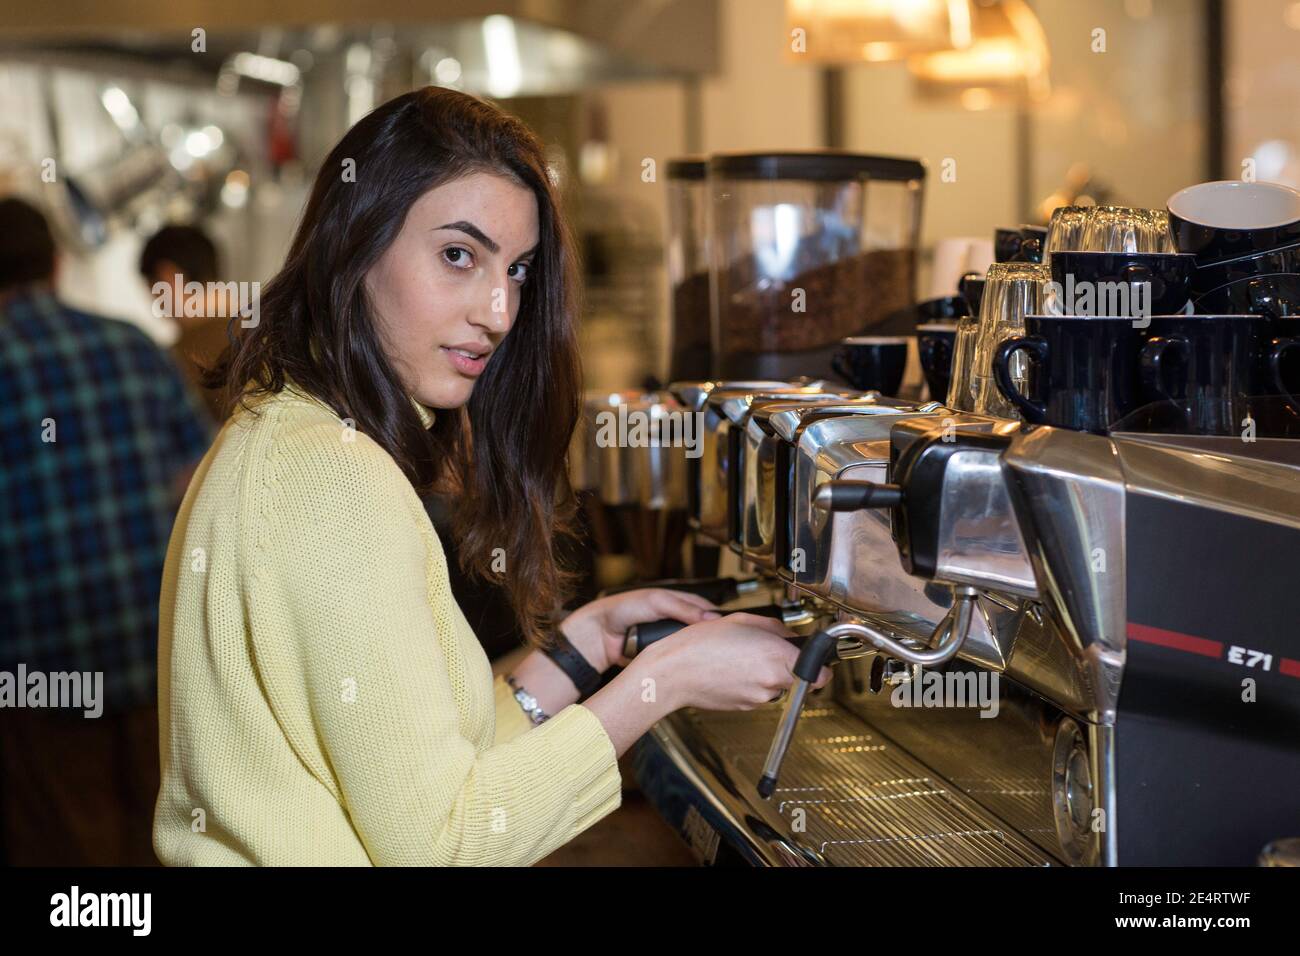 Coffee Business Concept - portrait of lady barista preparing coffee order with espresso machine at cafe. Stock Photo